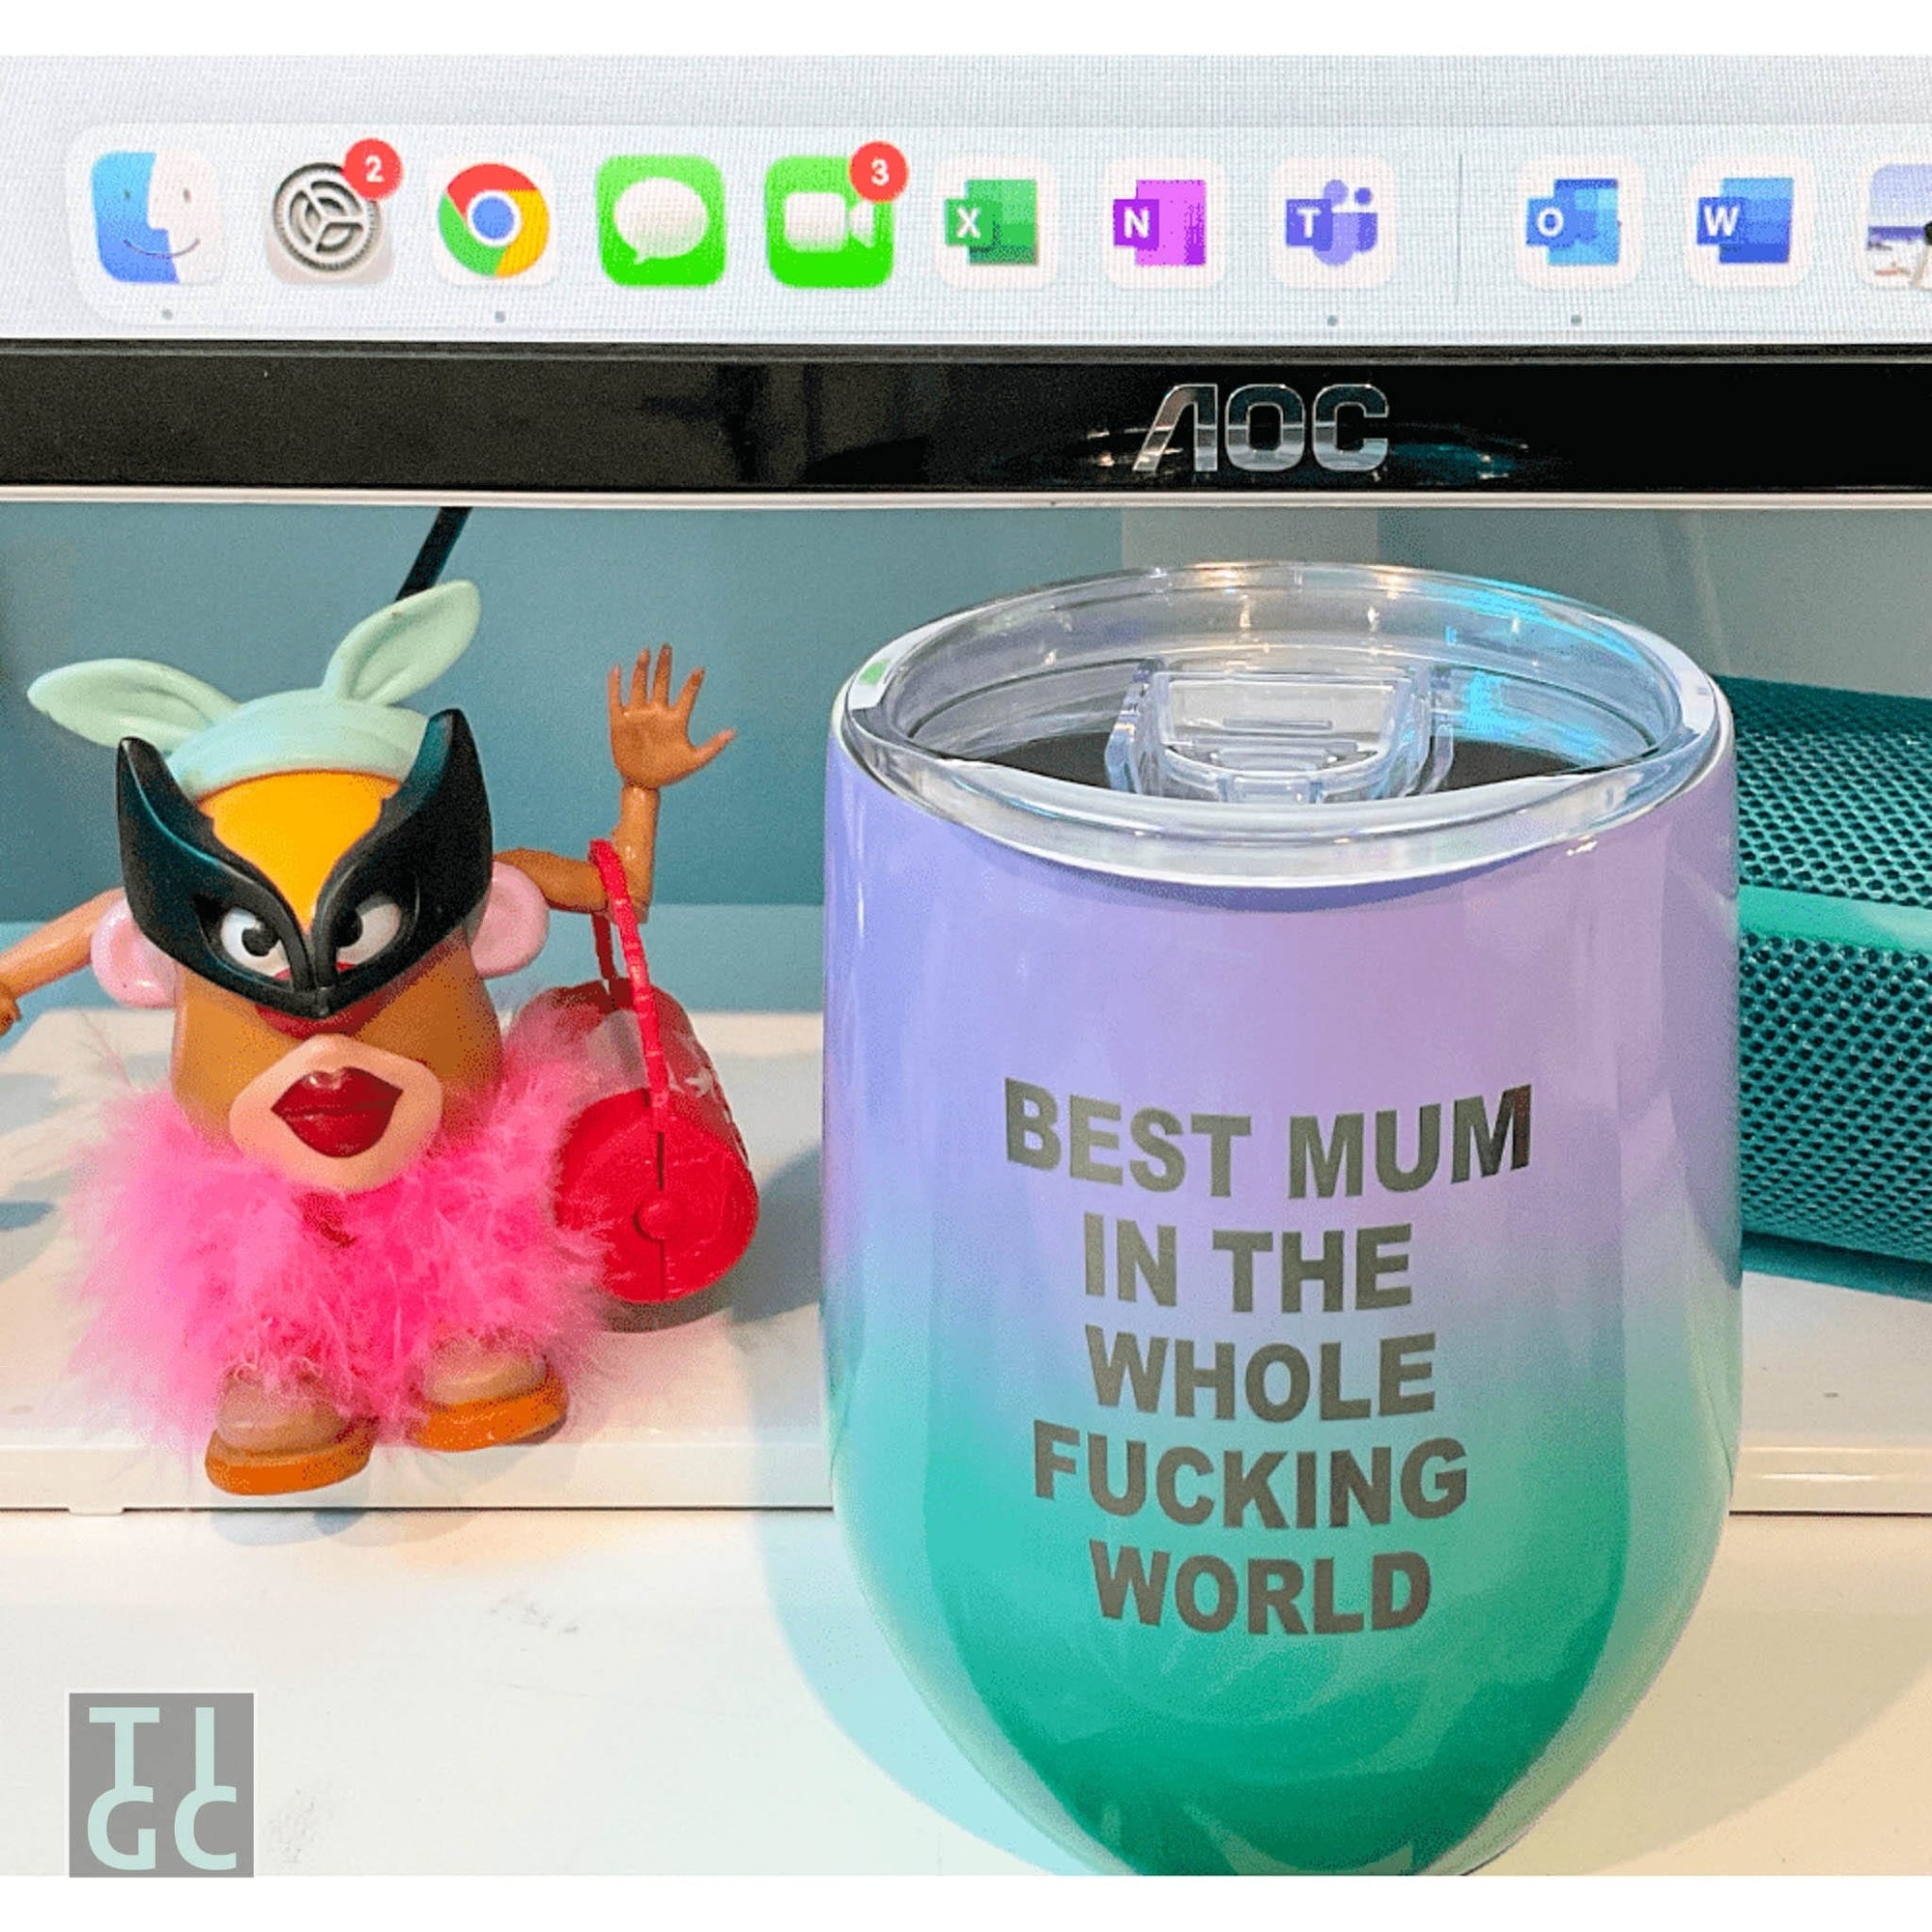 TIGC The Inappropriate Gift Co Best mum in the whole fucking world travel tumbler